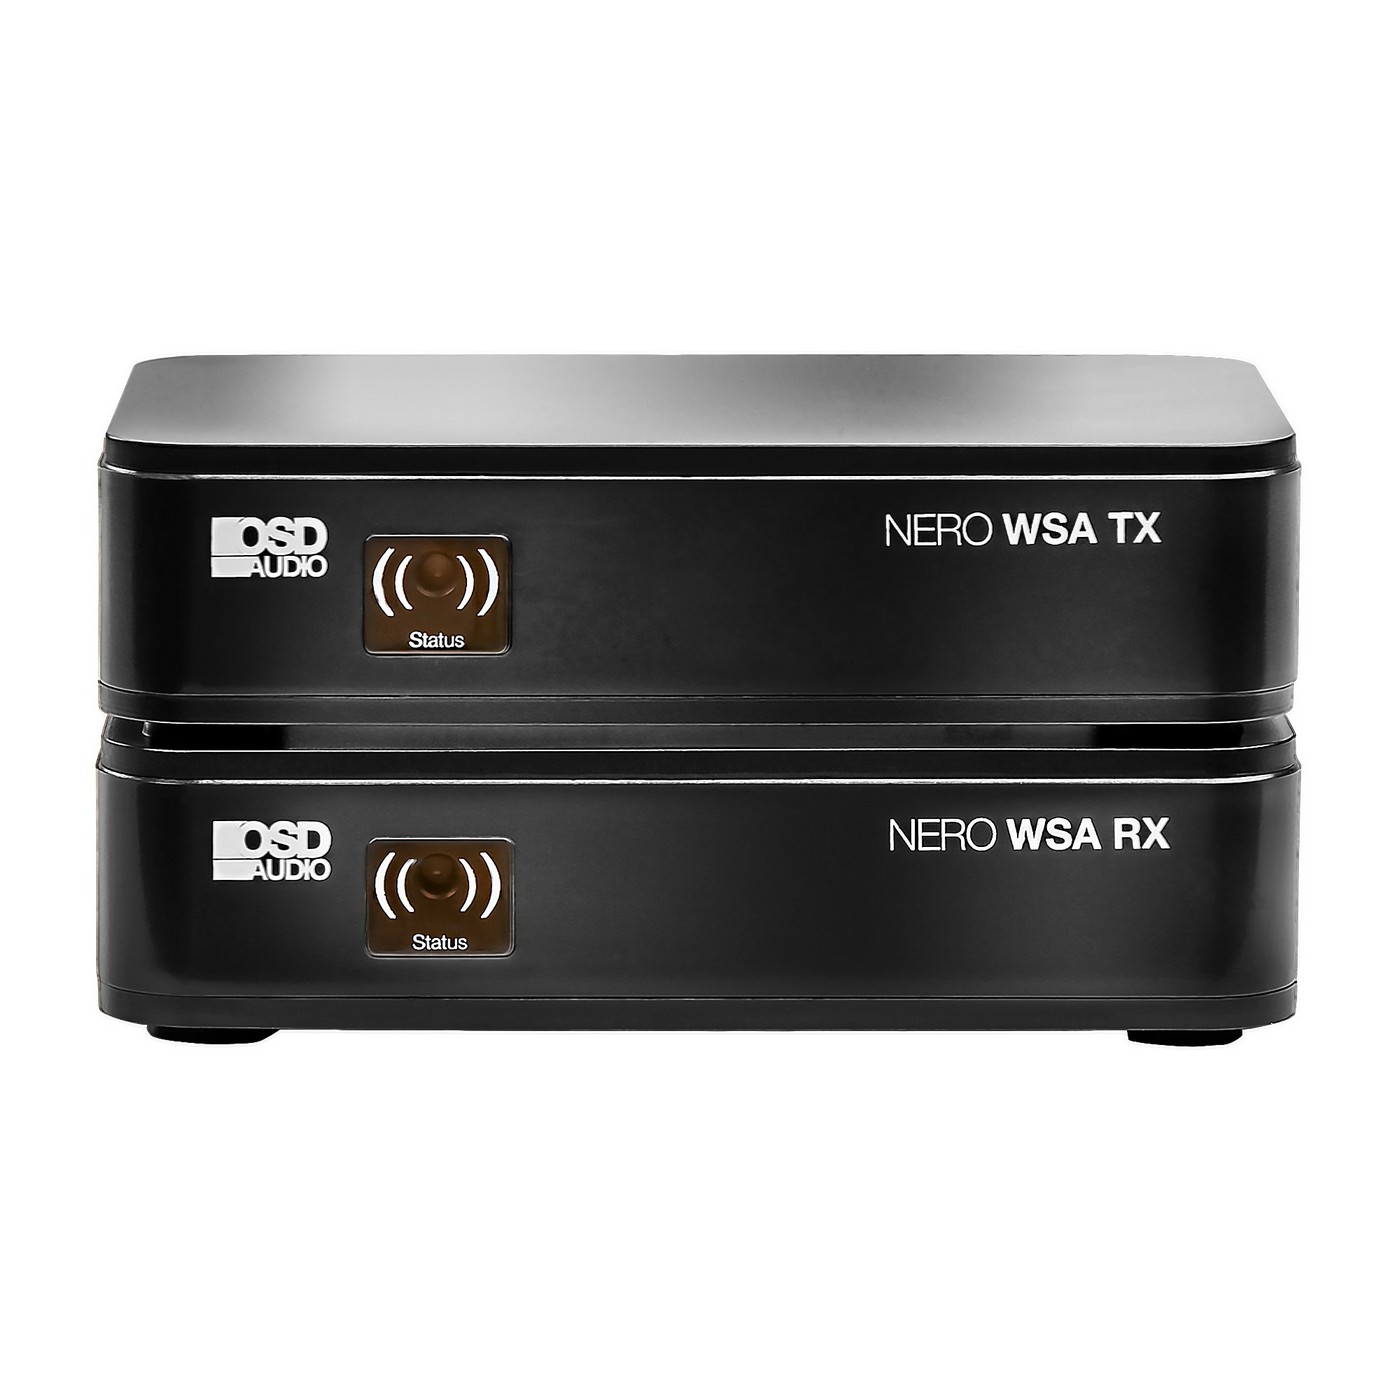 OSD Nero Wireless Subwoofer Transmitter/Receiver Kit w/ 5.8 GHz Frequency Band & Dual Antennas